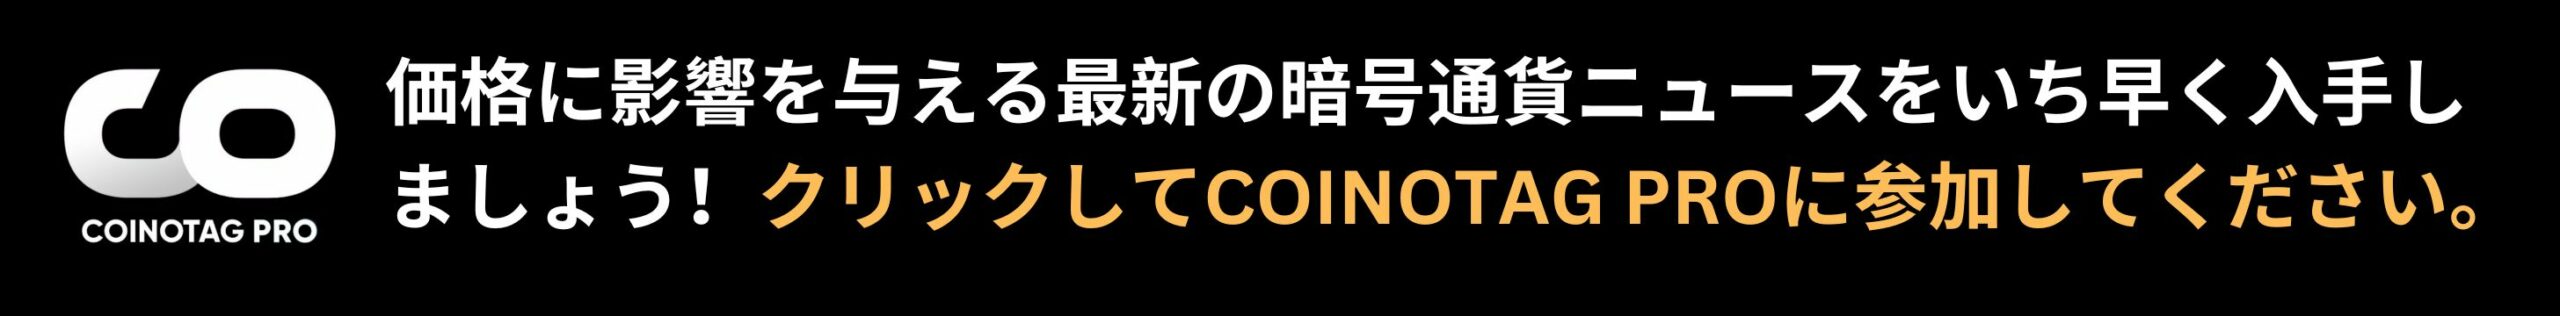 Coinotag Pro Banner